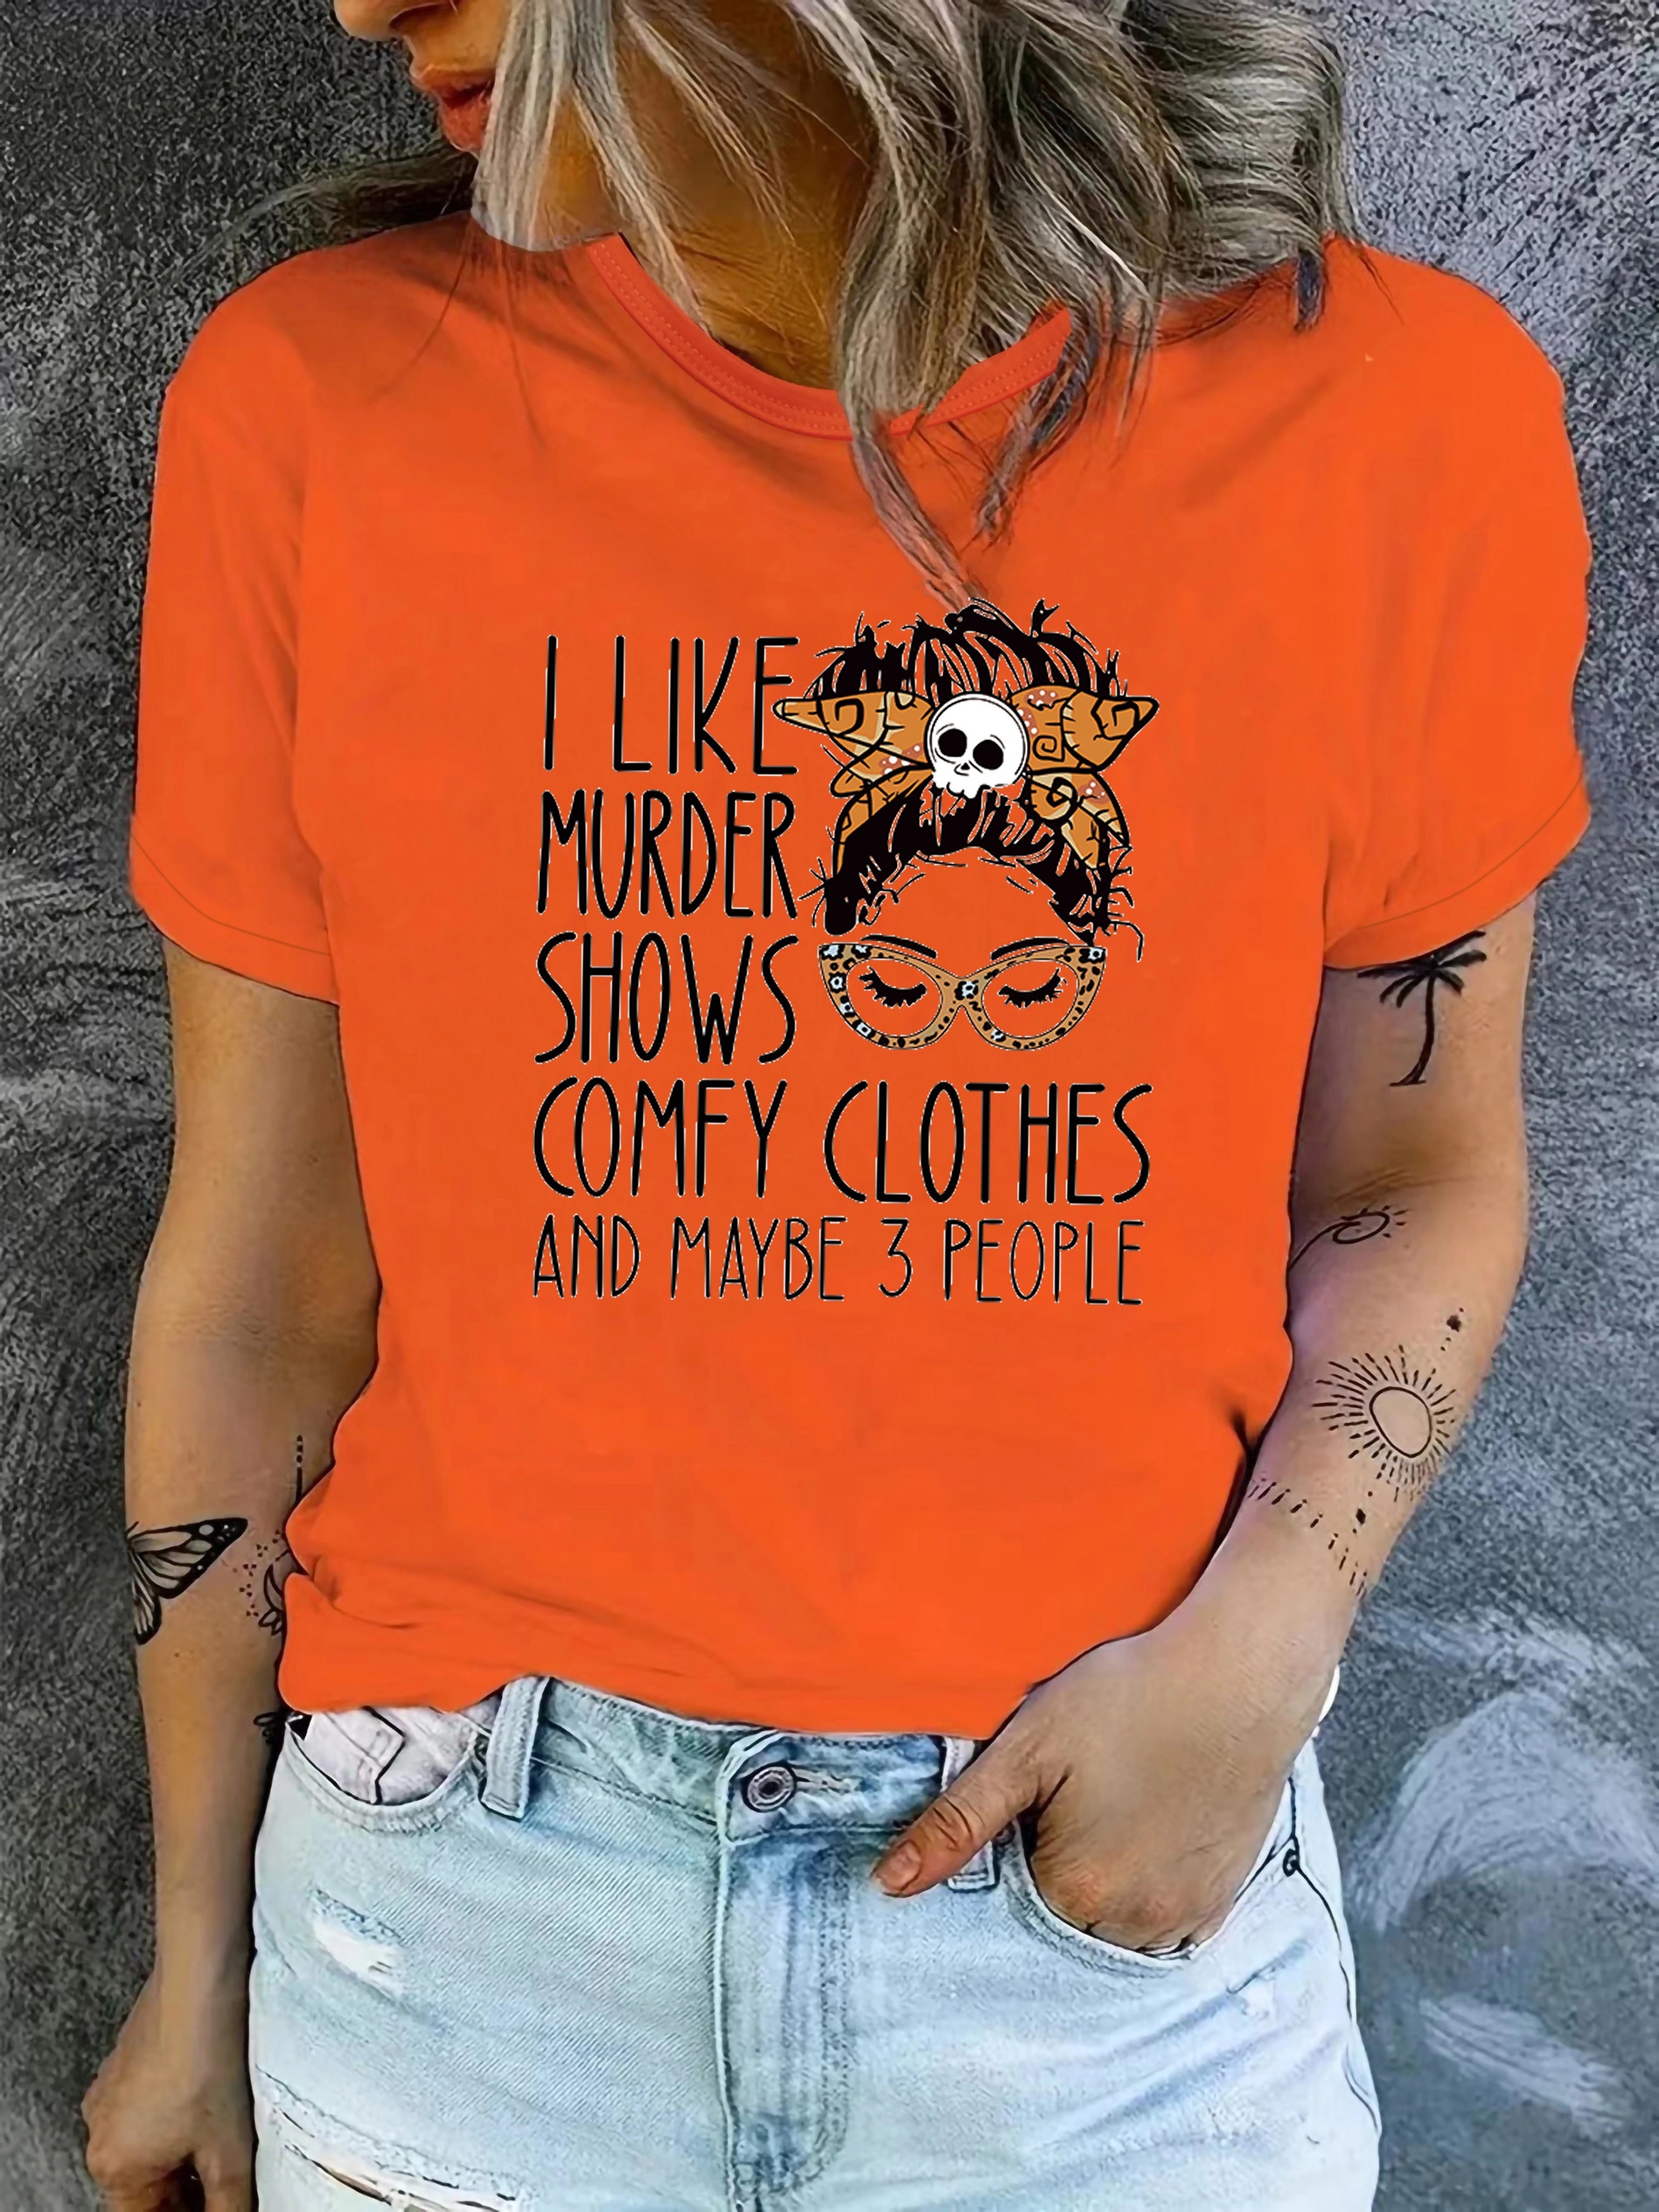 I Like Murder Shows Comfy Clothes and Maybe 3 People T-Shirts Women Casual  Novelty Horror Tees Funny Graphic Tops